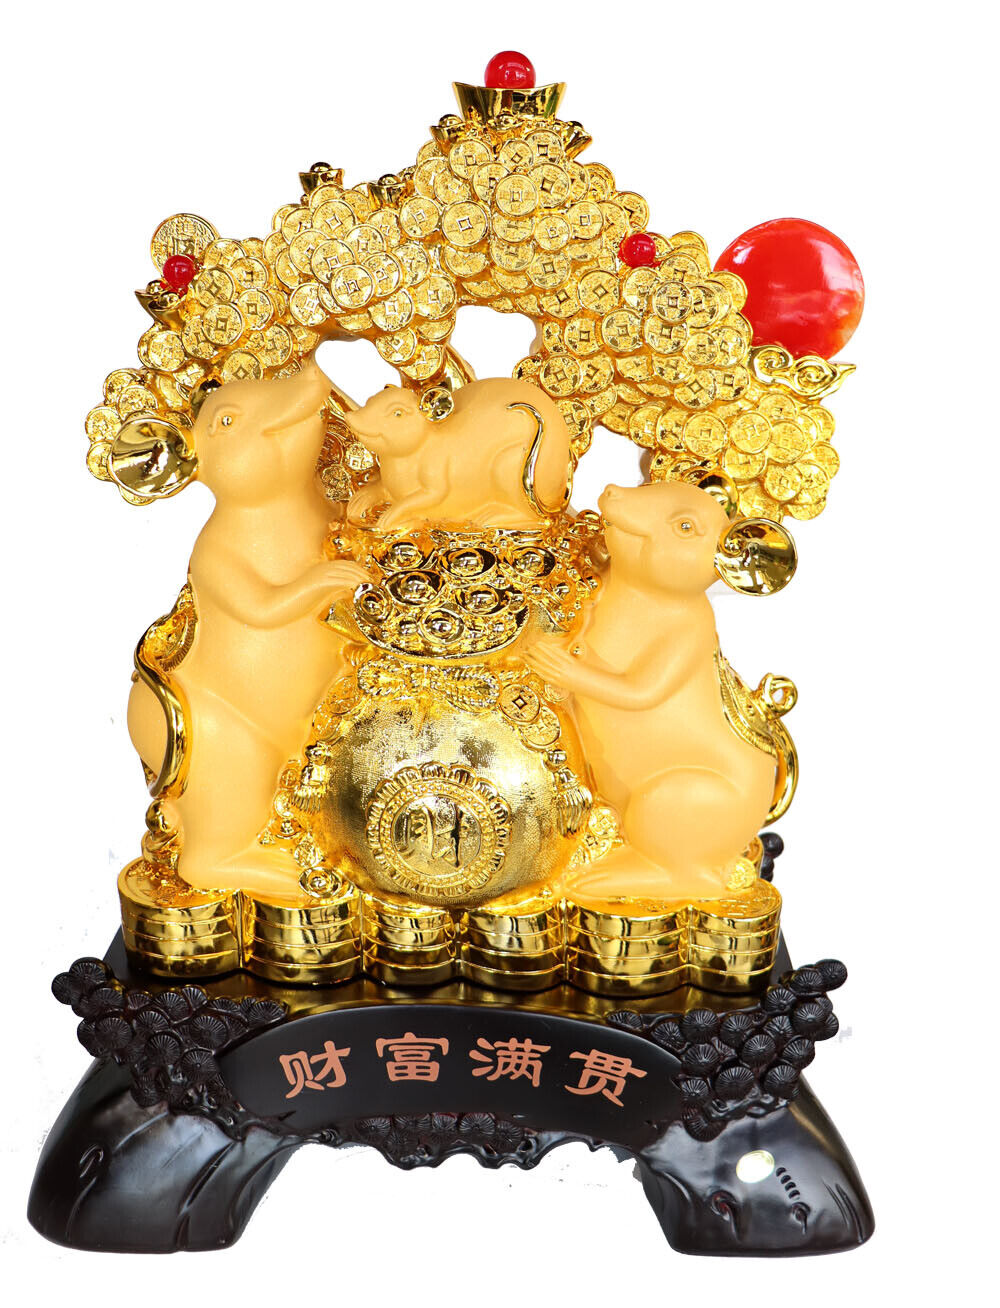 Big Chinese Zodiac Rat Statue with Bejeweled Money Tree and Money Bag